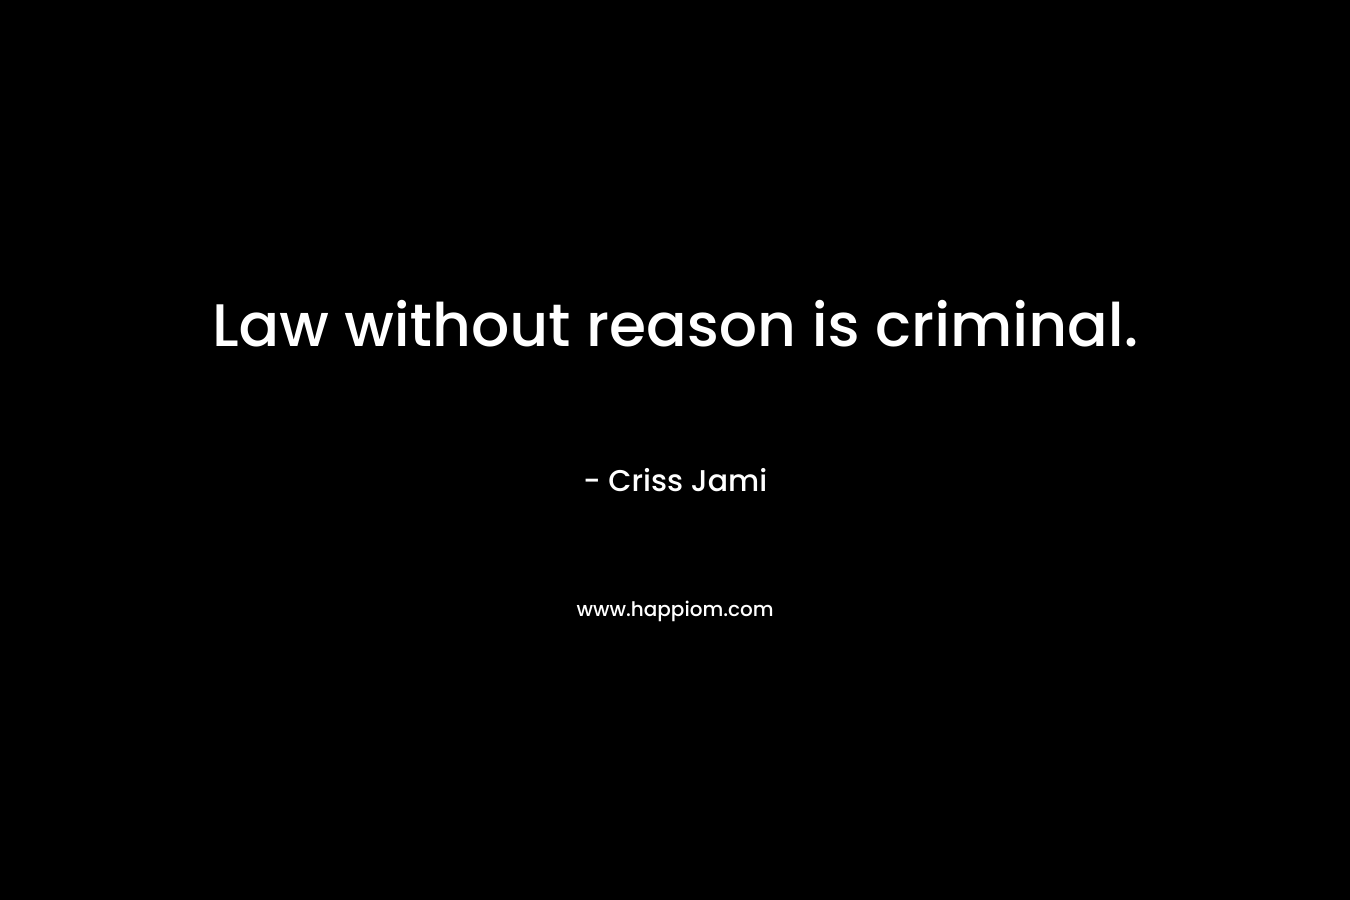 Law without reason is criminal.